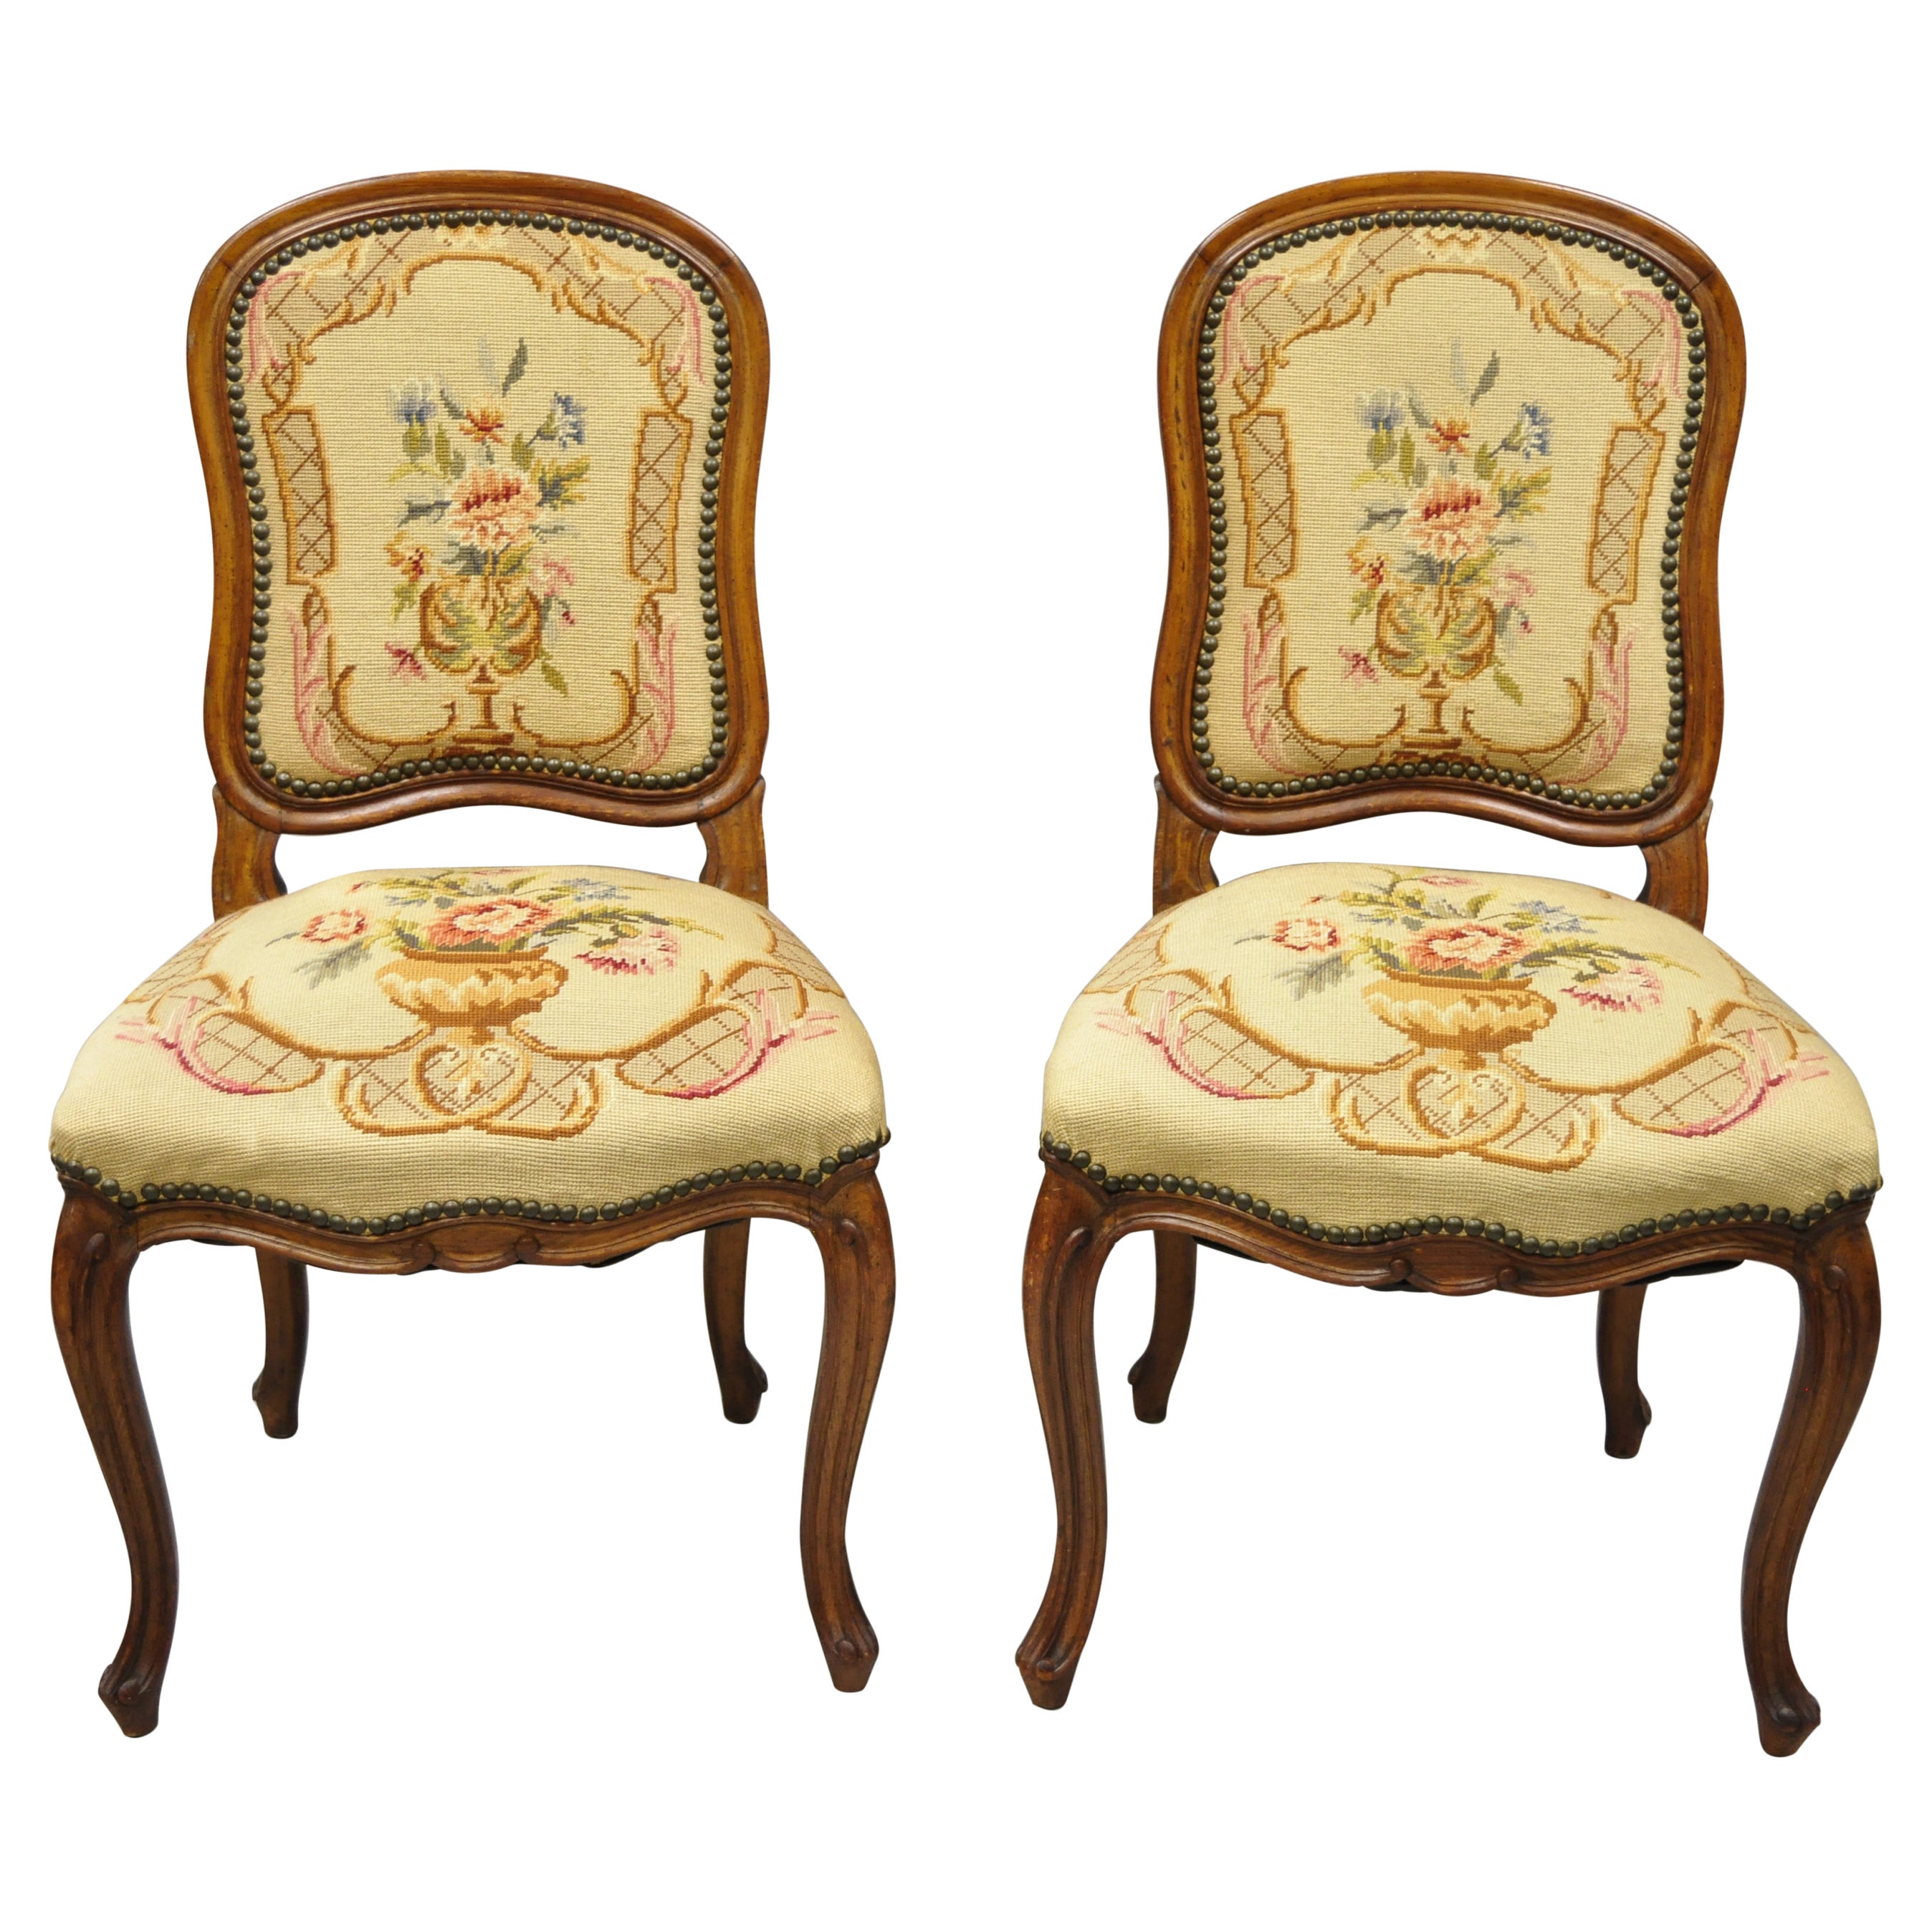 Antique French Provincial Louis XV Walnut Floral Needlepoint Side Chair, a Pair